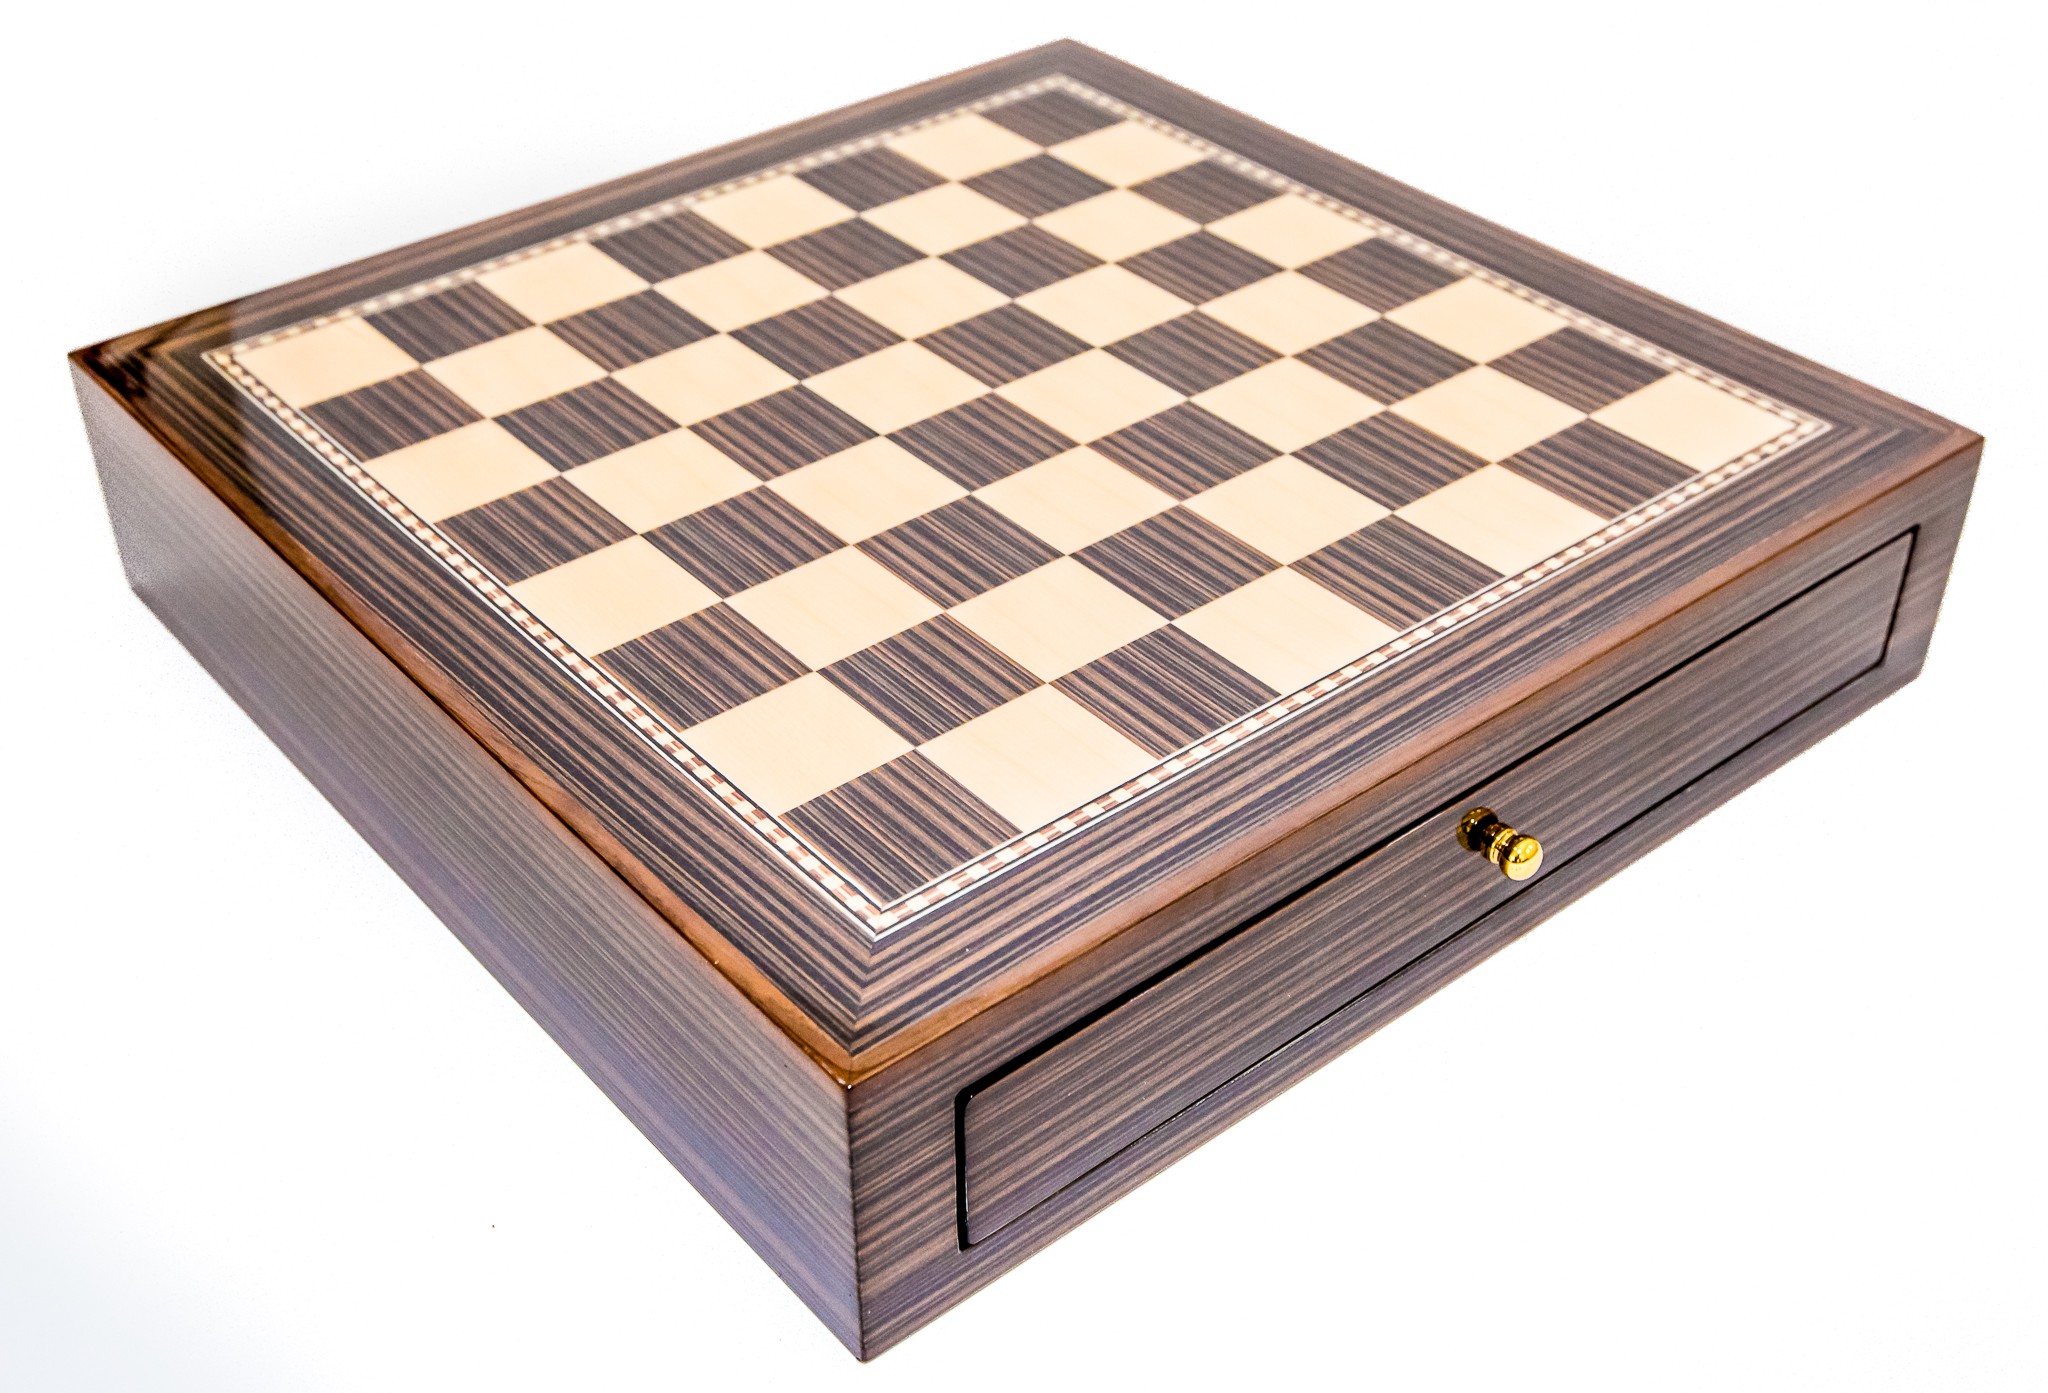 Deluxe Chess Board Case with Storage Compartment